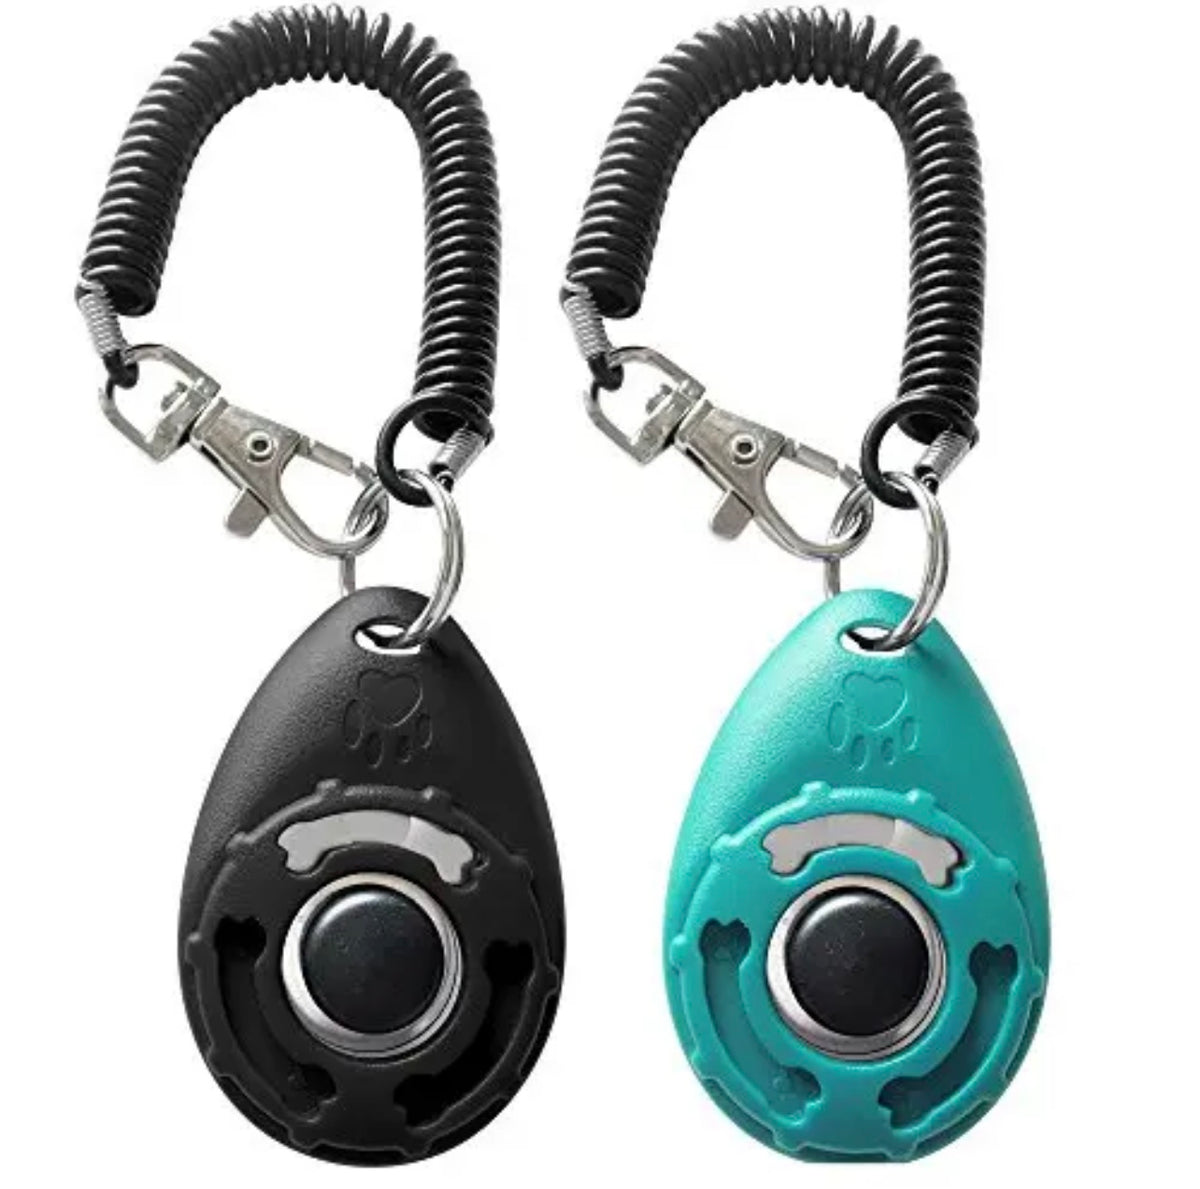 1 Piece Training Clicker With Wrist Strap-Dog Training Clickers( New Black or Blue)